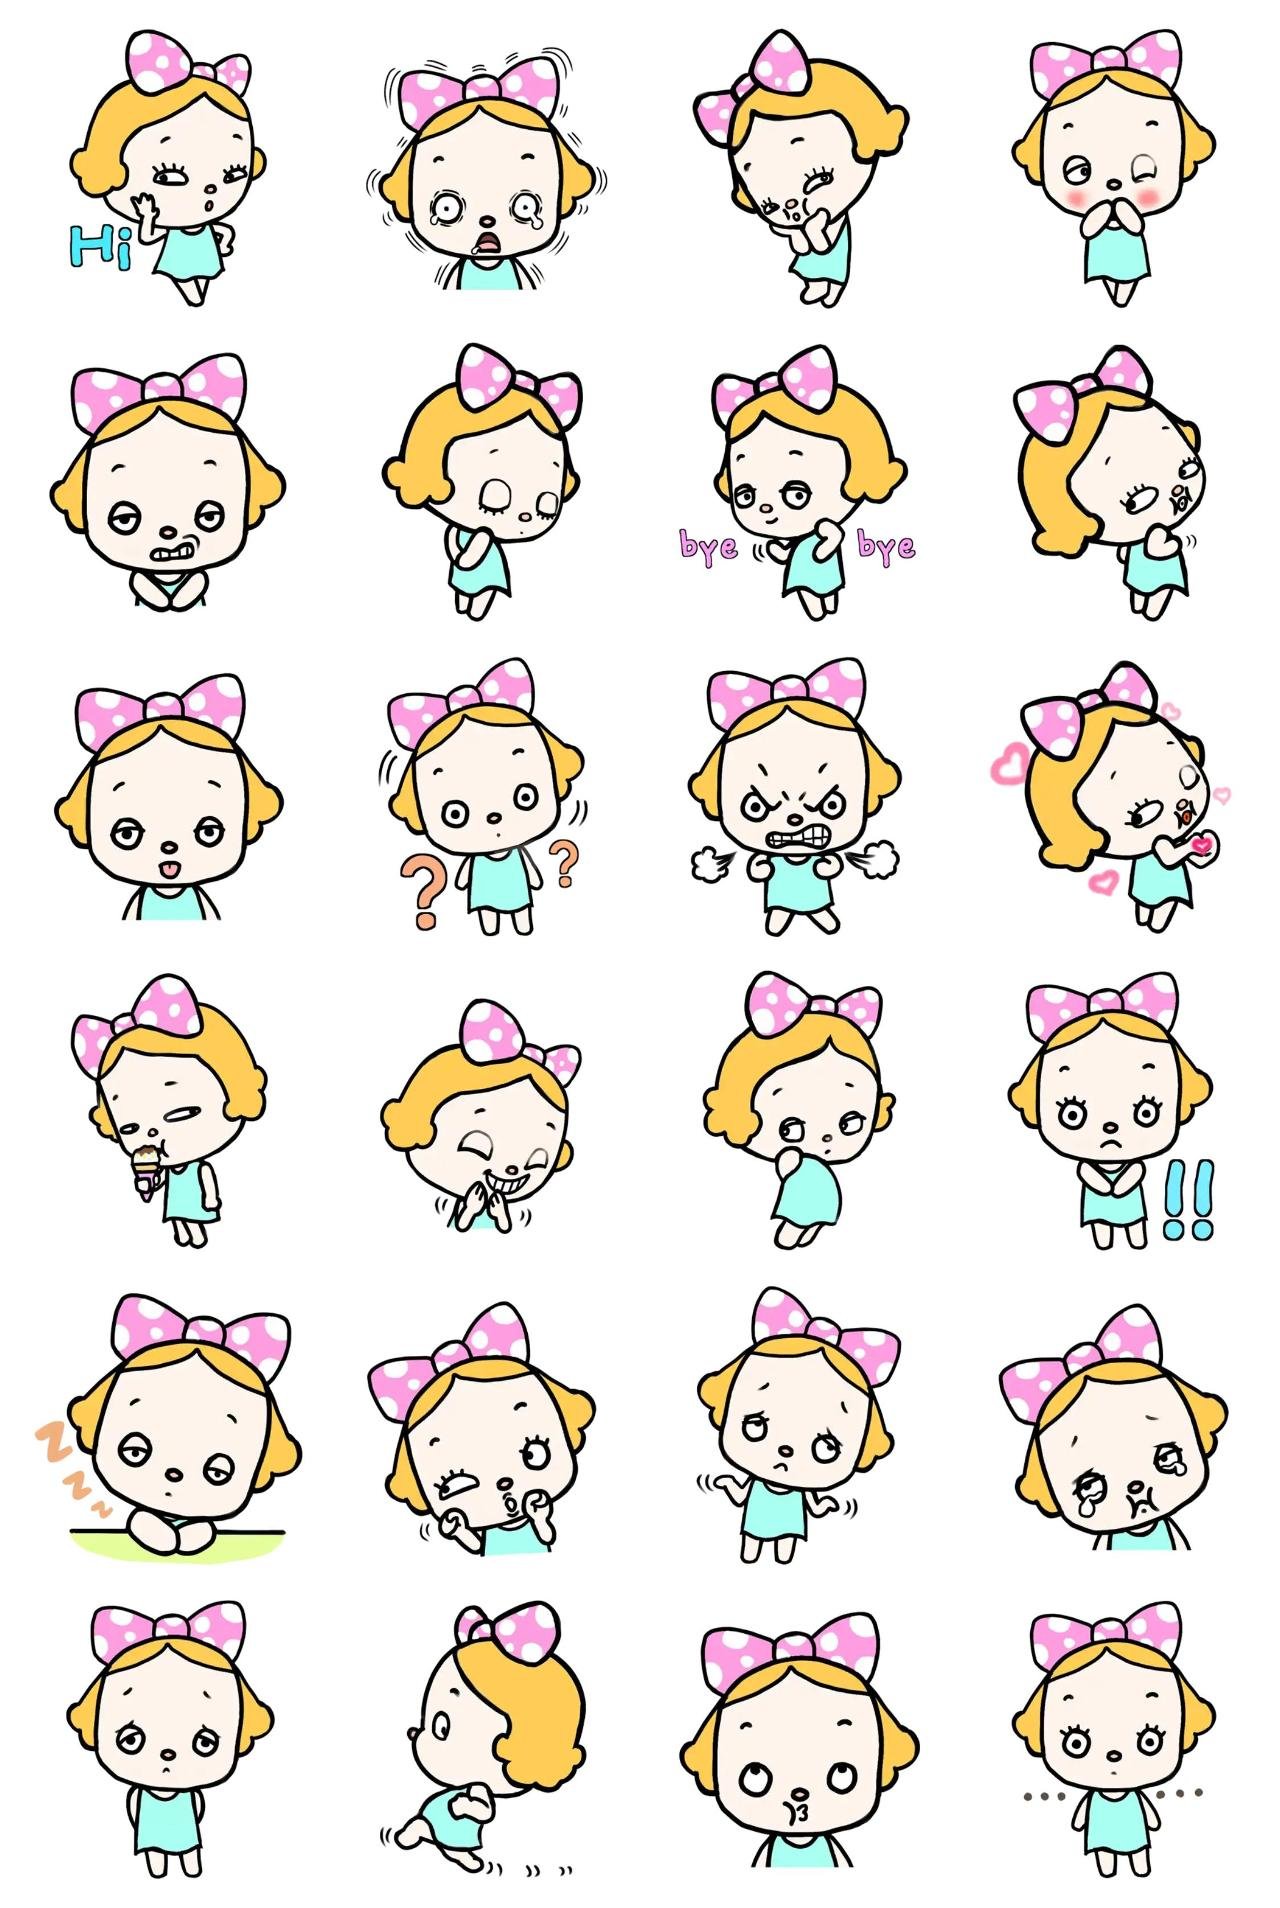 A cutie Jelly People sticker pack for Whatsapp, Telegram, Signal, and others chatting and message apps